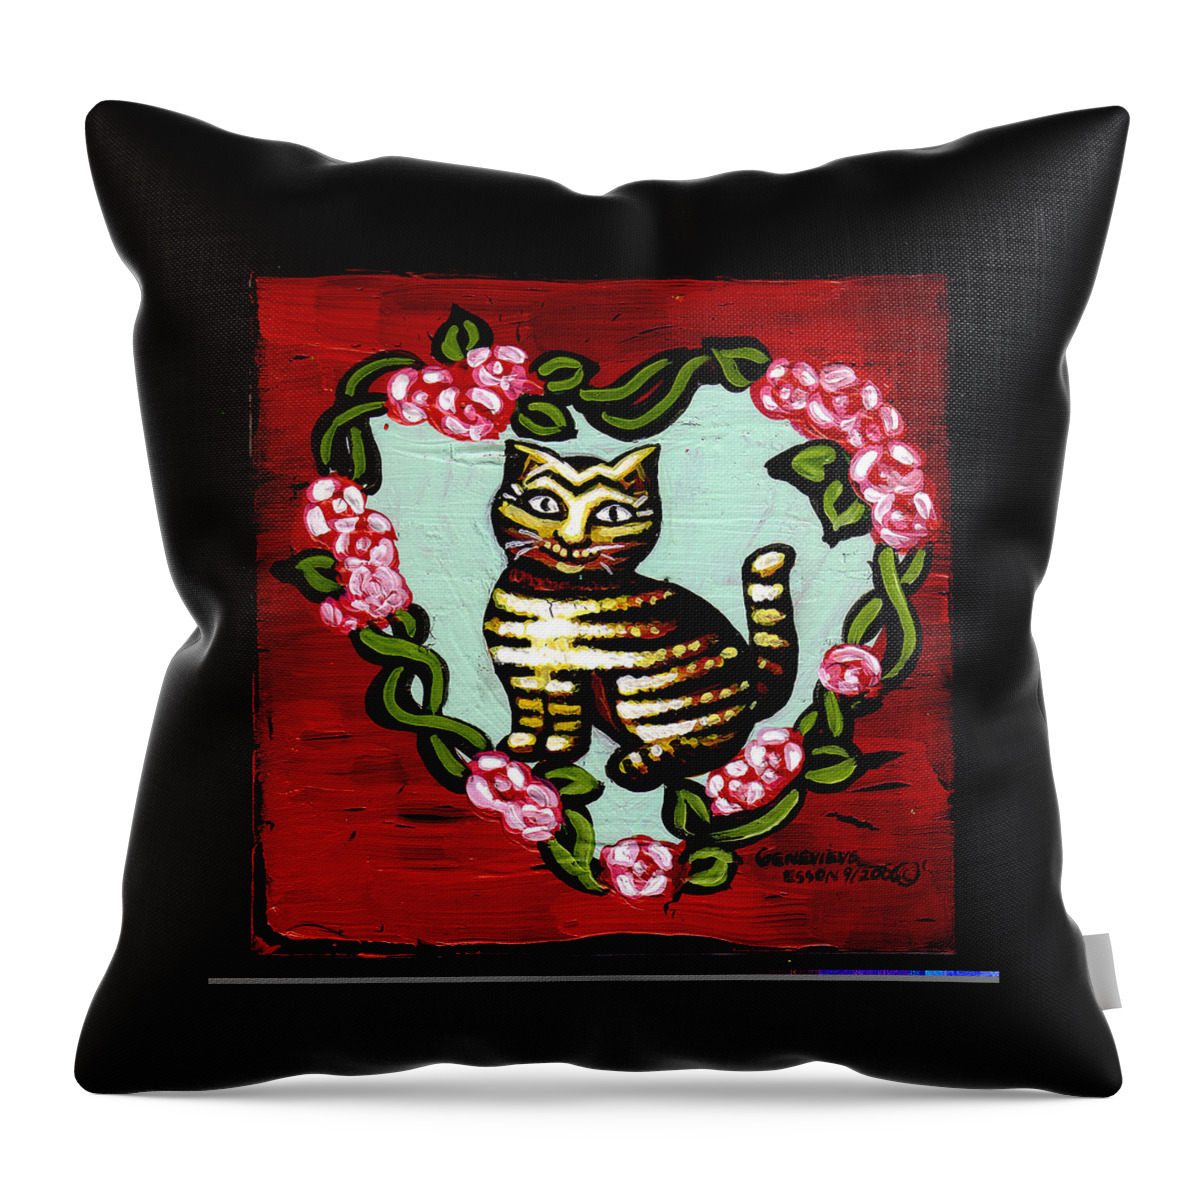 Cat Throw Pillow featuring the painting Cat In Heart Wreath 2 by Genevieve Esson